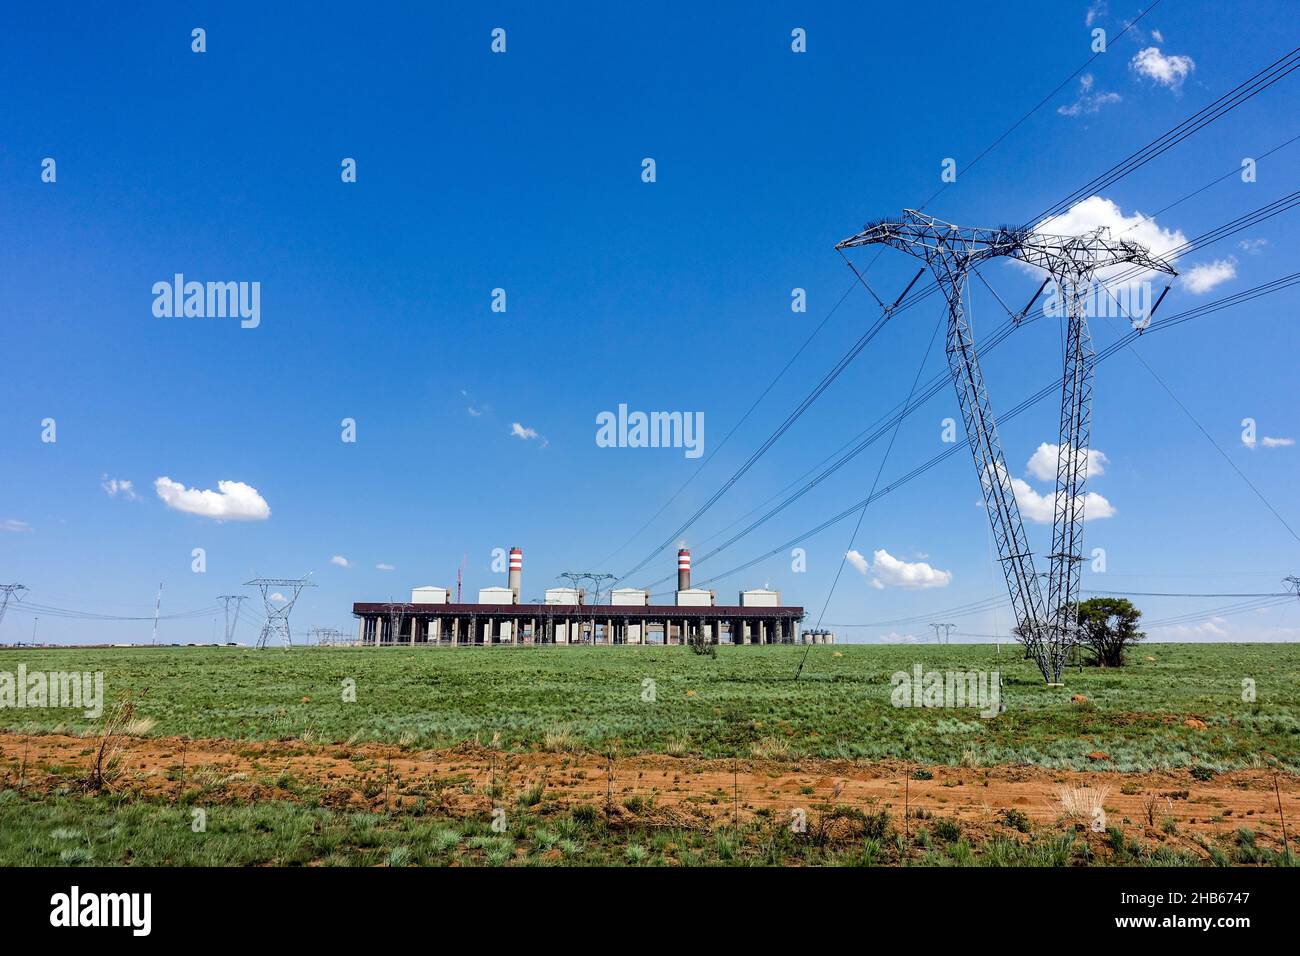 Kusile coal-fired power station, Mpumalanga, South Africa, on a clear blue sky day Stock Photo